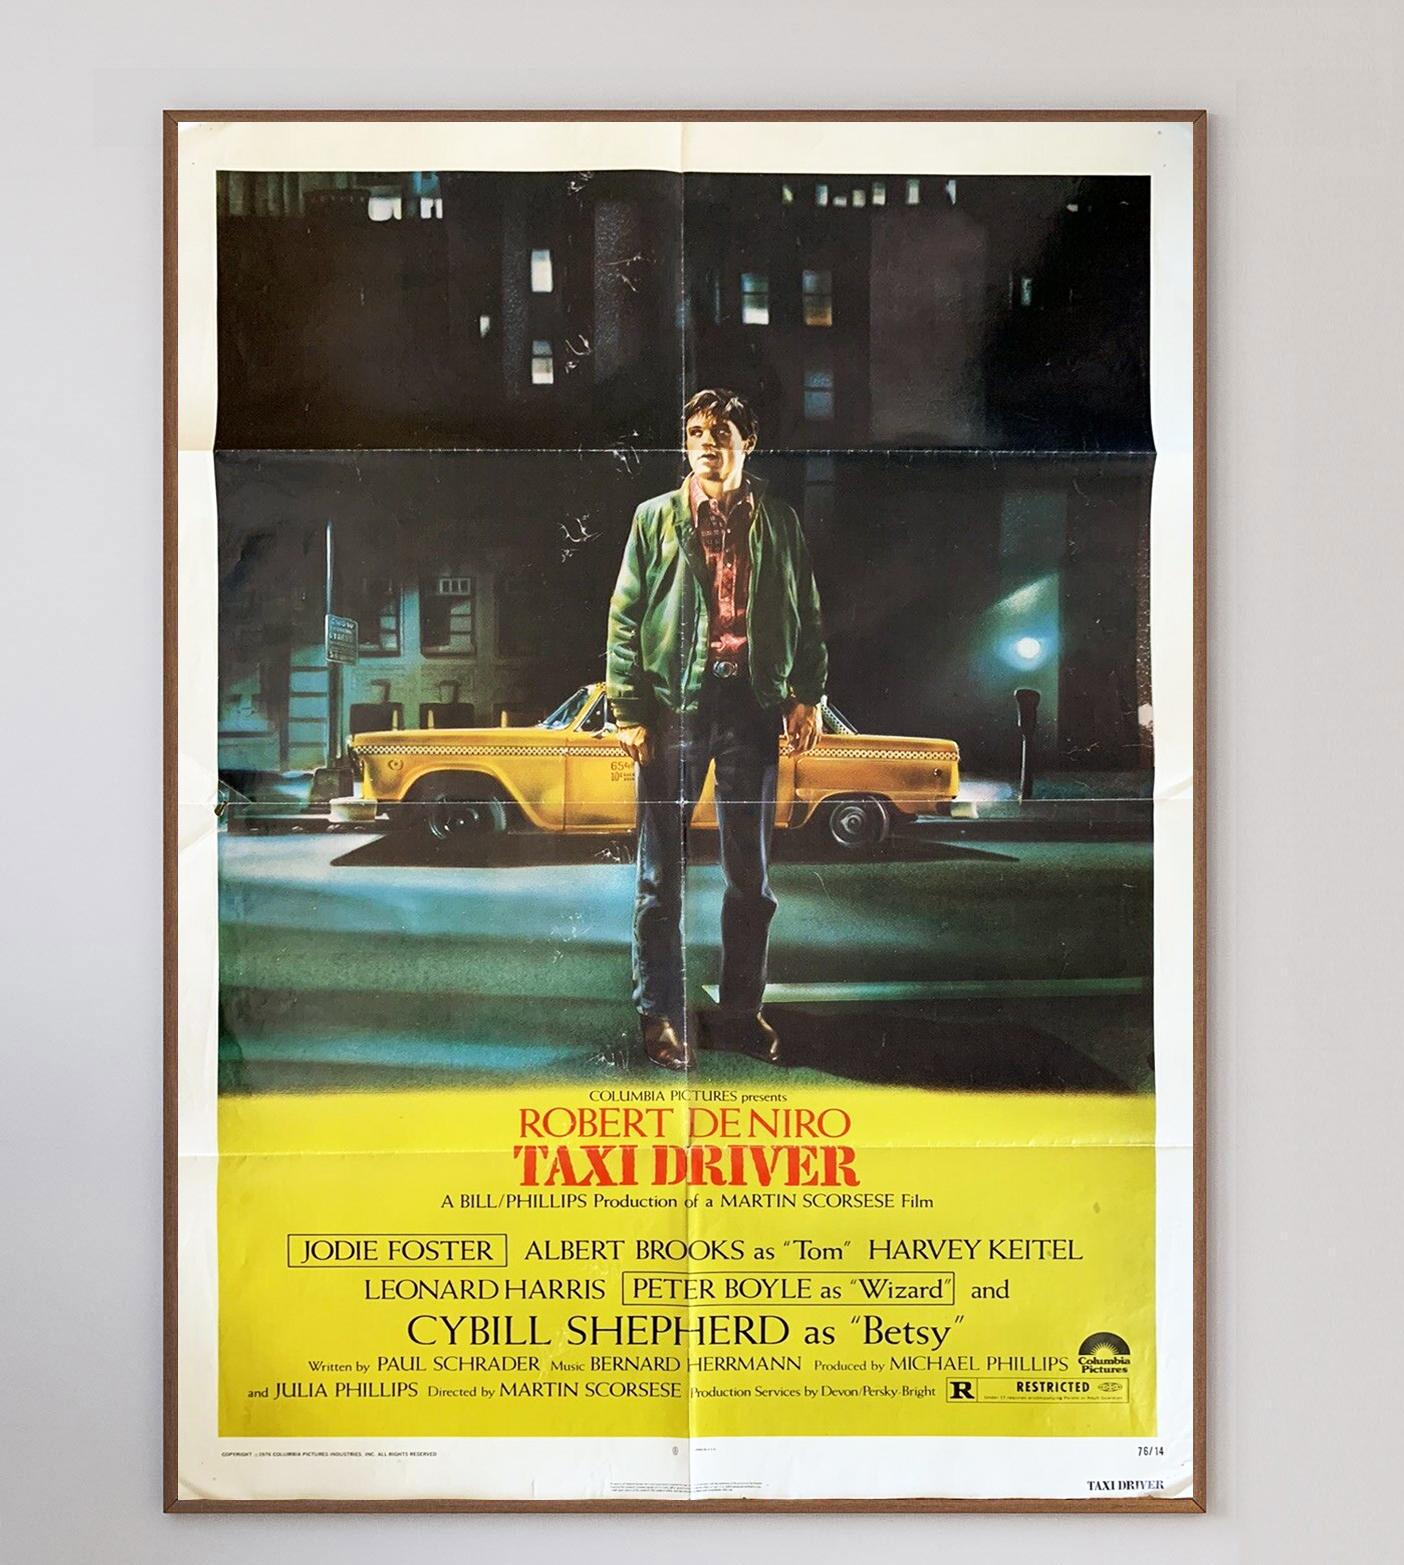 Consistently ranked as one of the greatest films of all time, Martin Scorsese and Paul Schrader’s 1976 Taxi Driver is as powerful and moving today as it was the day it was released. Starring Robert De Niro and Jodie Foster as well as a supporting